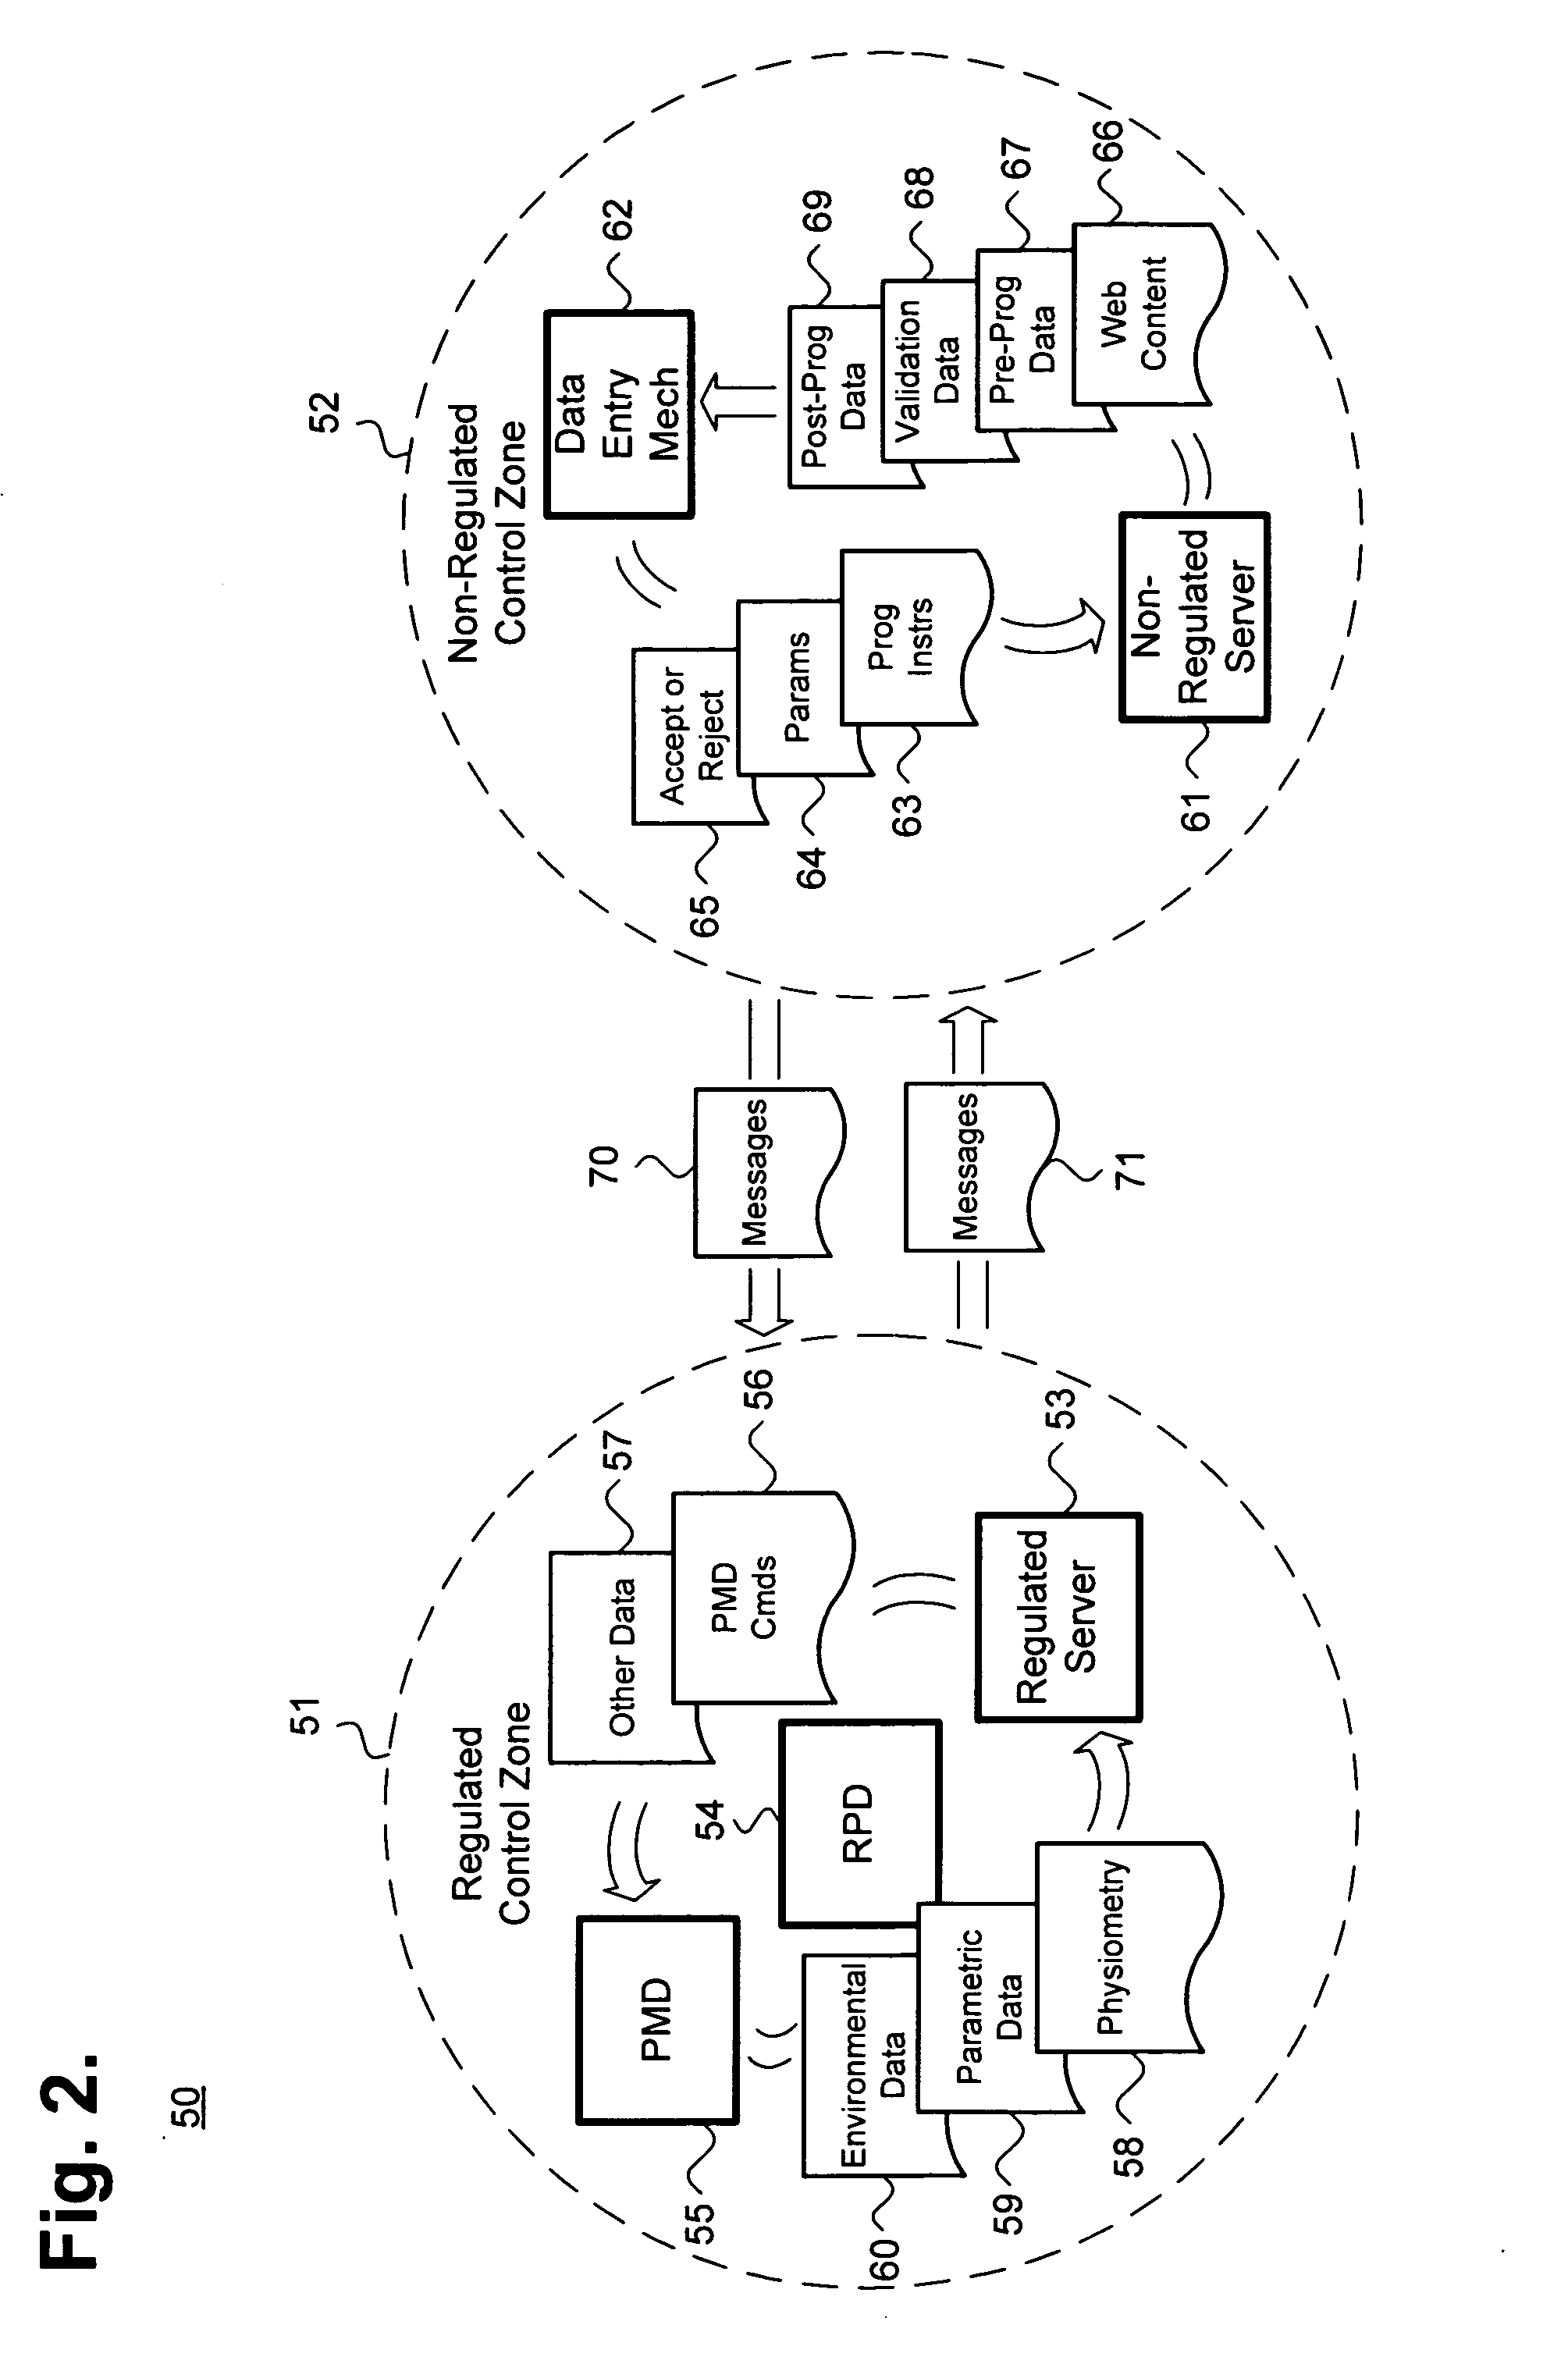 System and method for remotely programming a patient medical device